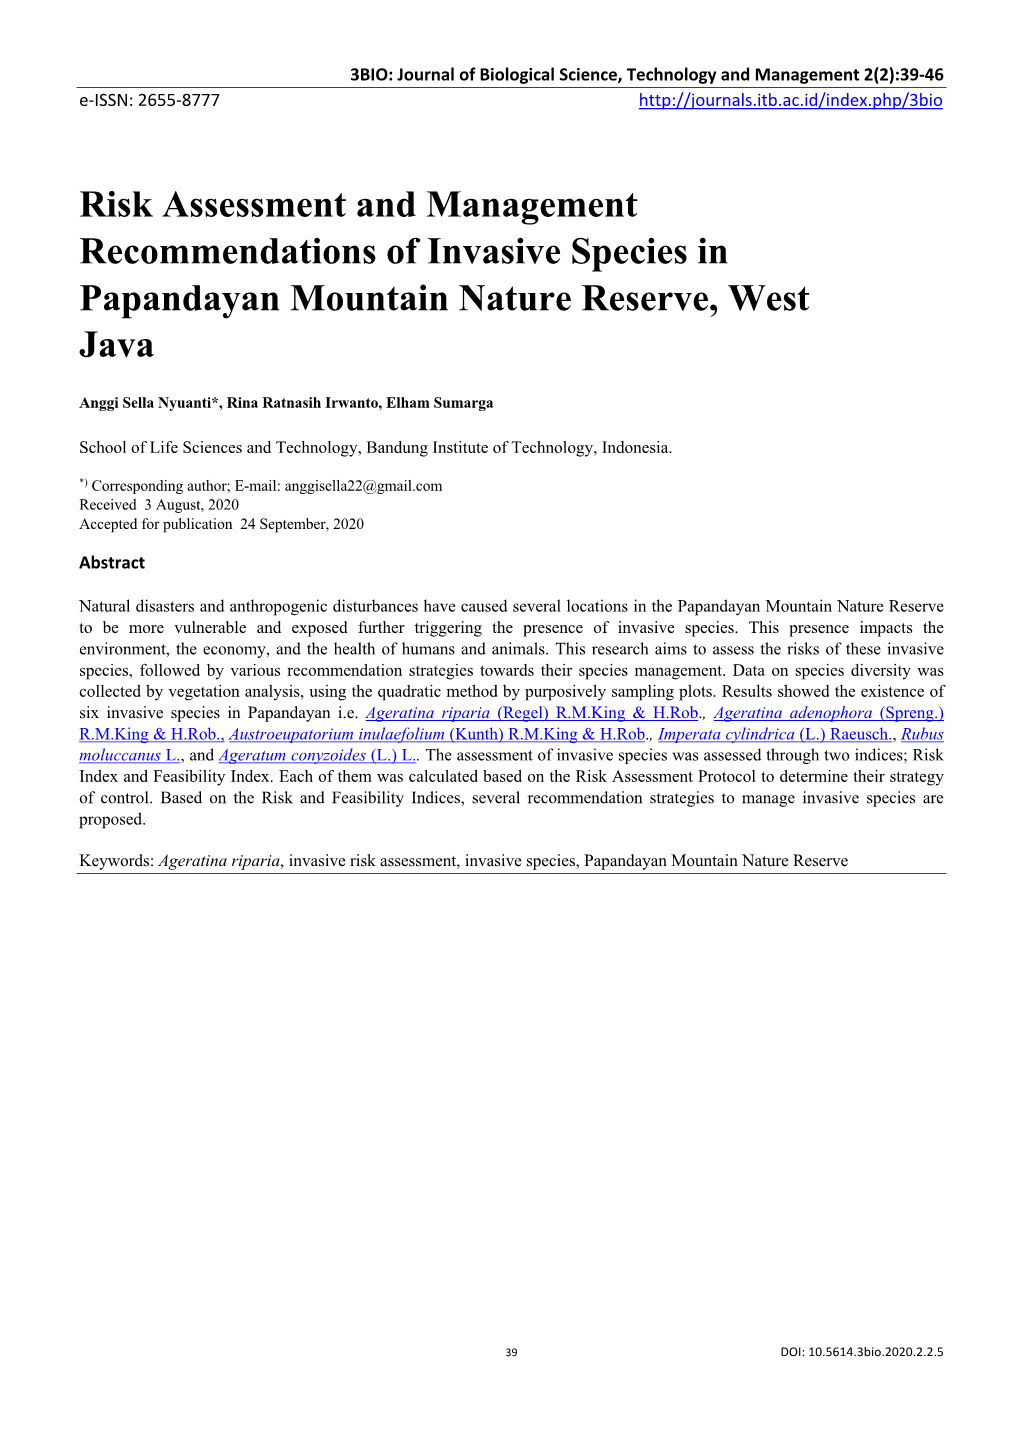 Risk Assessment and Management Recommendations of Invasive Species in Papandayan Mountain Nature Reserve, West Java